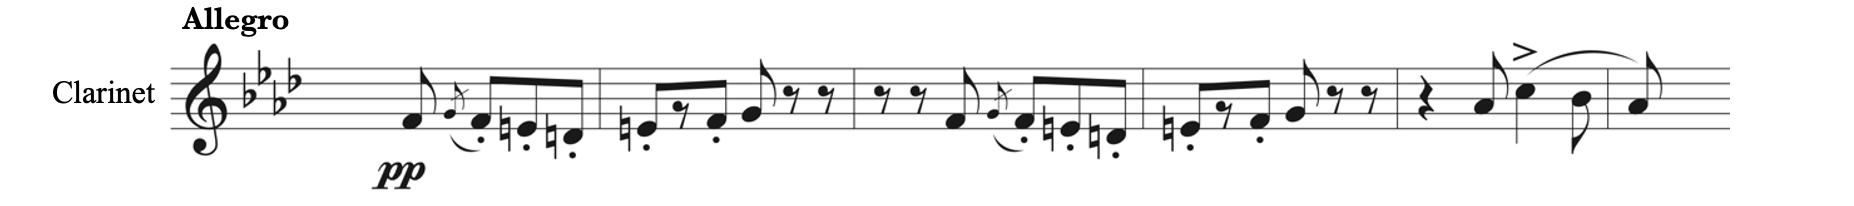 Single clarinet melody from Gounod's Funeral March of a Marionette